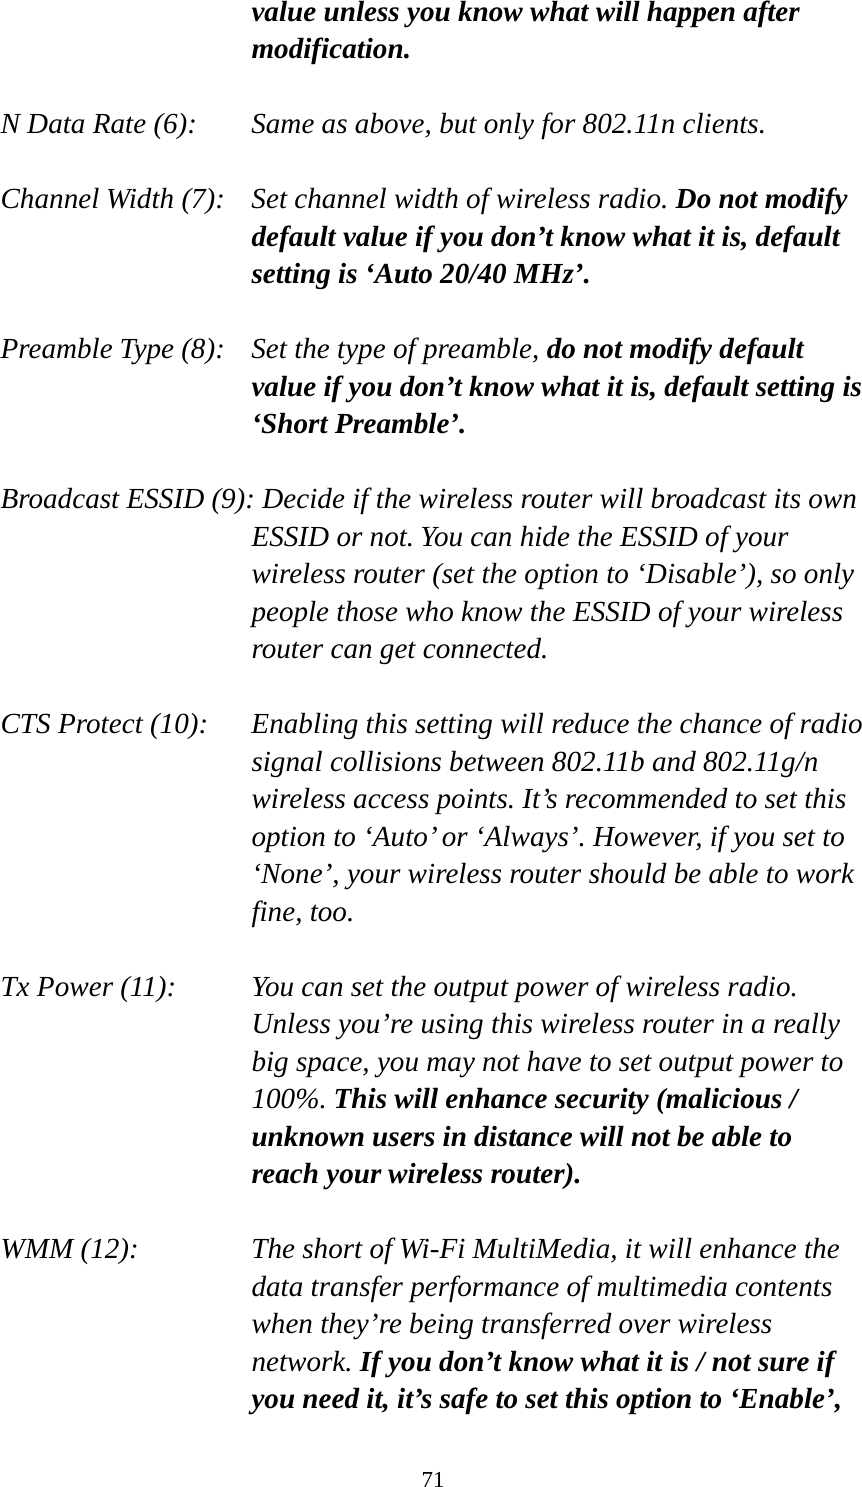 71 value unless you know what will happen after modification.  N Data Rate (6):   Same as above, but only for 802.11n clients.  Channel Width (7):    Set channel width of wireless radio. Do not modify default value if you don’t know what it is, default setting is ‘Auto 20/40 MHz’.  Preamble Type (8):   Set the type of preamble, do not modify default value if you don’t know what it is, default setting is ‘Short Preamble’.  Broadcast ESSID (9): Decide if the wireless router will broadcast its own ESSID or not. You can hide the ESSID of your wireless router (set the option to ‘Disable’), so only people those who know the ESSID of your wireless router can get connected.  CTS Protect (10):    Enabling this setting will reduce the chance of radio signal collisions between 802.11b and 802.11g/n wireless access points. It’s recommended to set this option to ‘Auto’ or ‘Always’. However, if you set to ‘None’, your wireless router should be able to work fine, too.  Tx Power (11):    You can set the output power of wireless radio. Unless you’re using this wireless router in a really big space, you may not have to set output power to 100%. This will enhance security (malicious / unknown users in distance will not be able to reach your wireless router).  WMM (12):    The short of Wi-Fi MultiMedia, it will enhance the data transfer performance of multimedia contents when they’re being transferred over wireless network. If you don’t know what it is / not sure if you need it, it’s safe to set this option to ‘Enable’, 